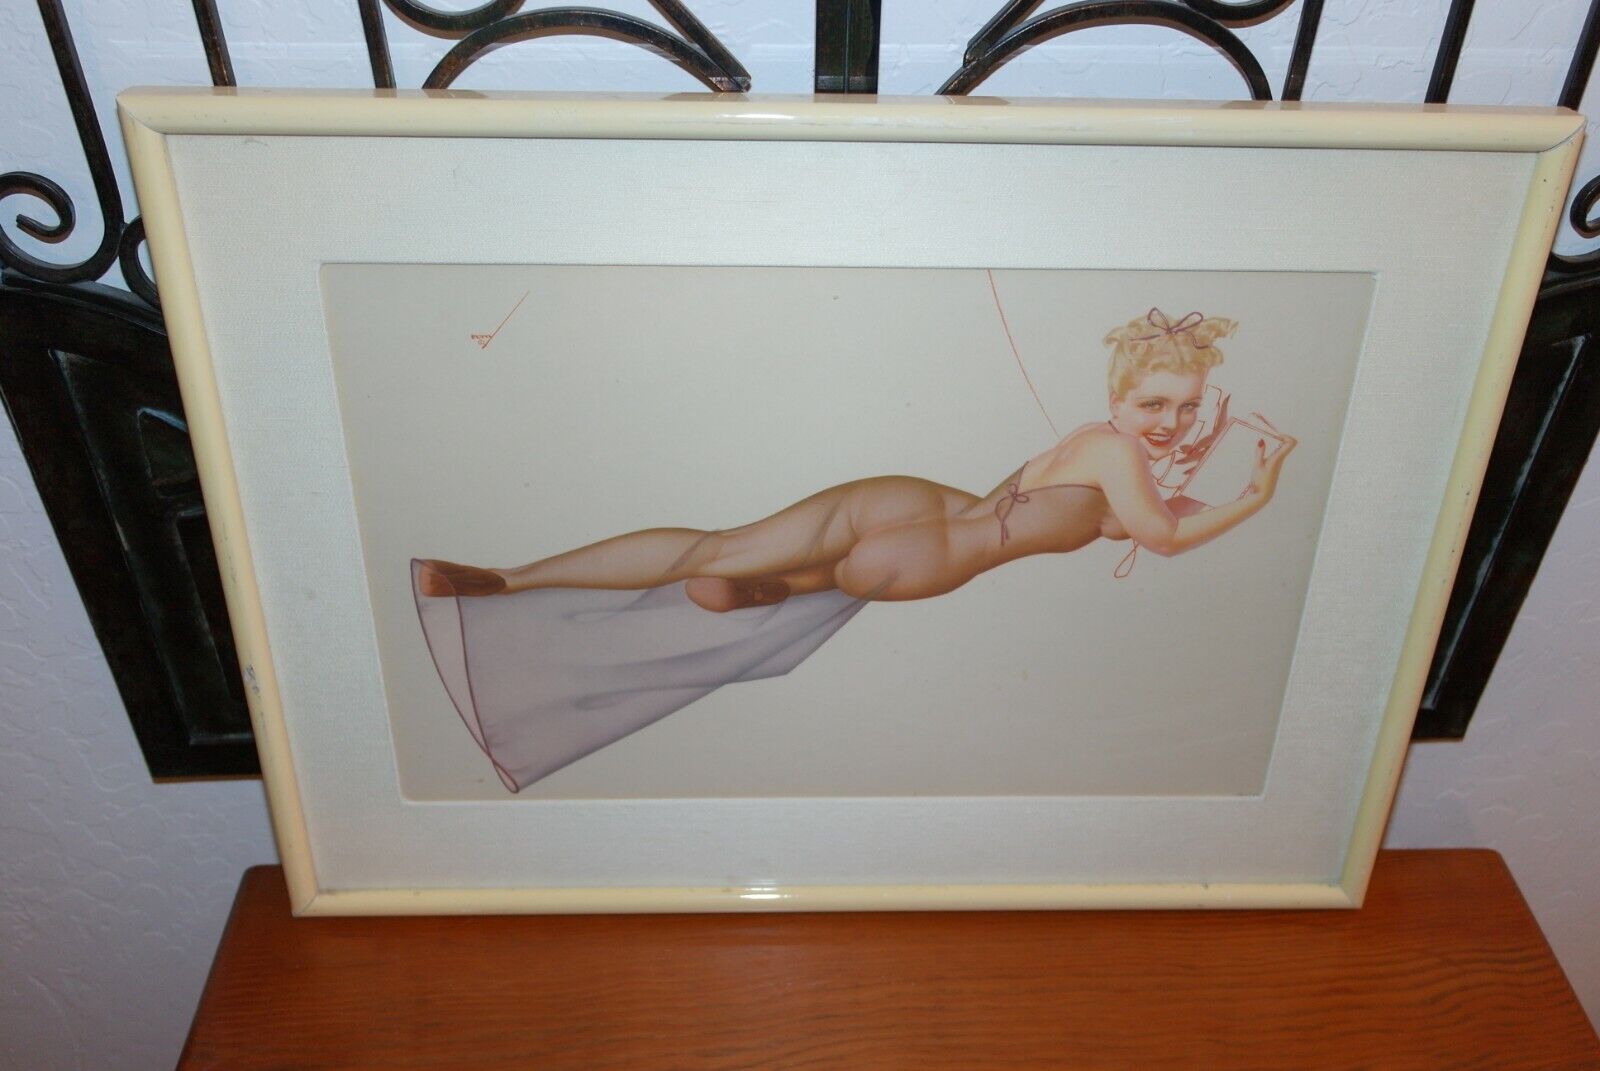 Vintage 1948 George Petty Framed Matted Pin-Up Art Lithograph.